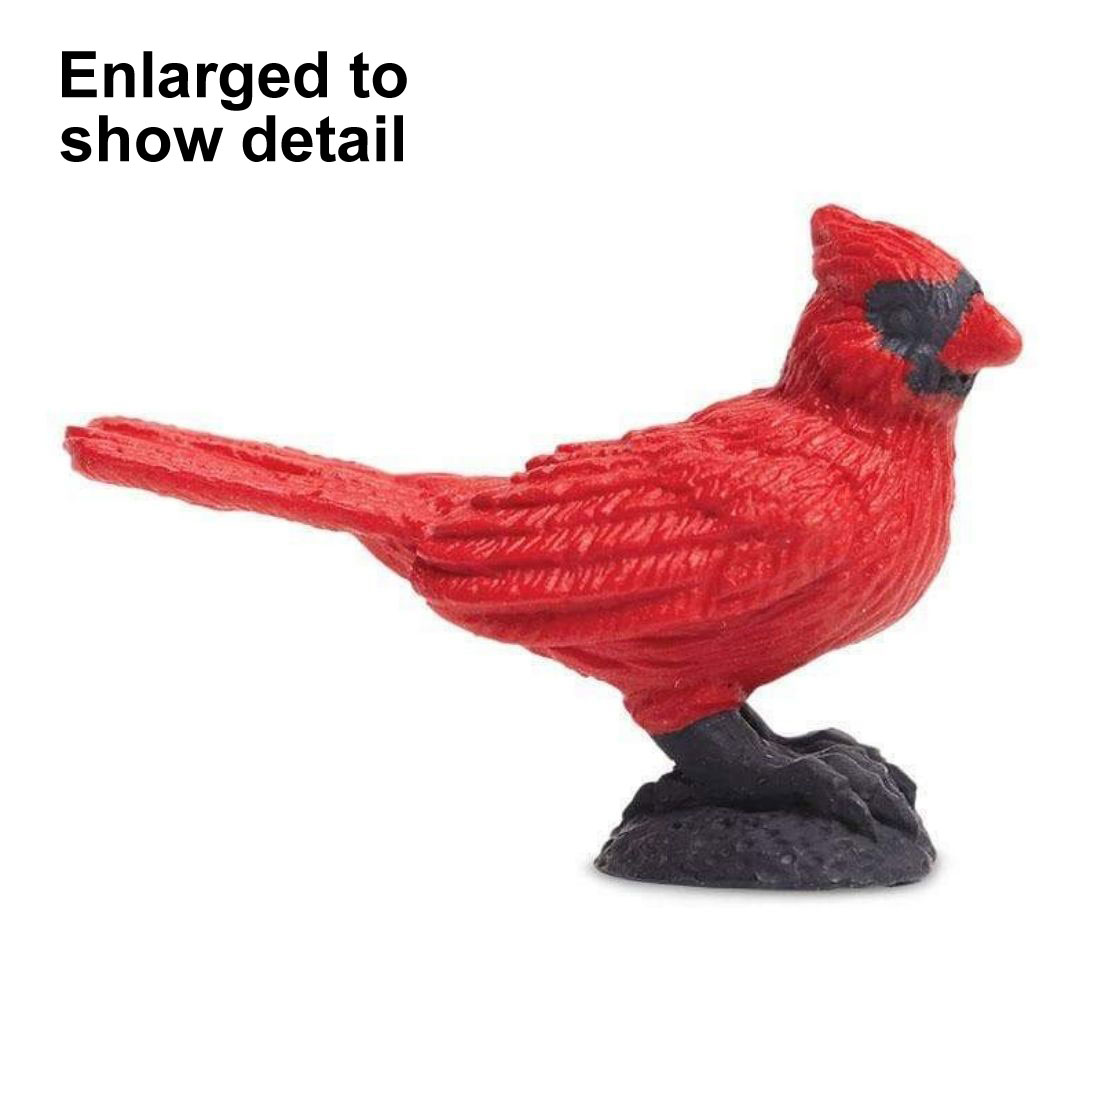 Cardinal Mini Figurine with the text Enlarged to Show Detail